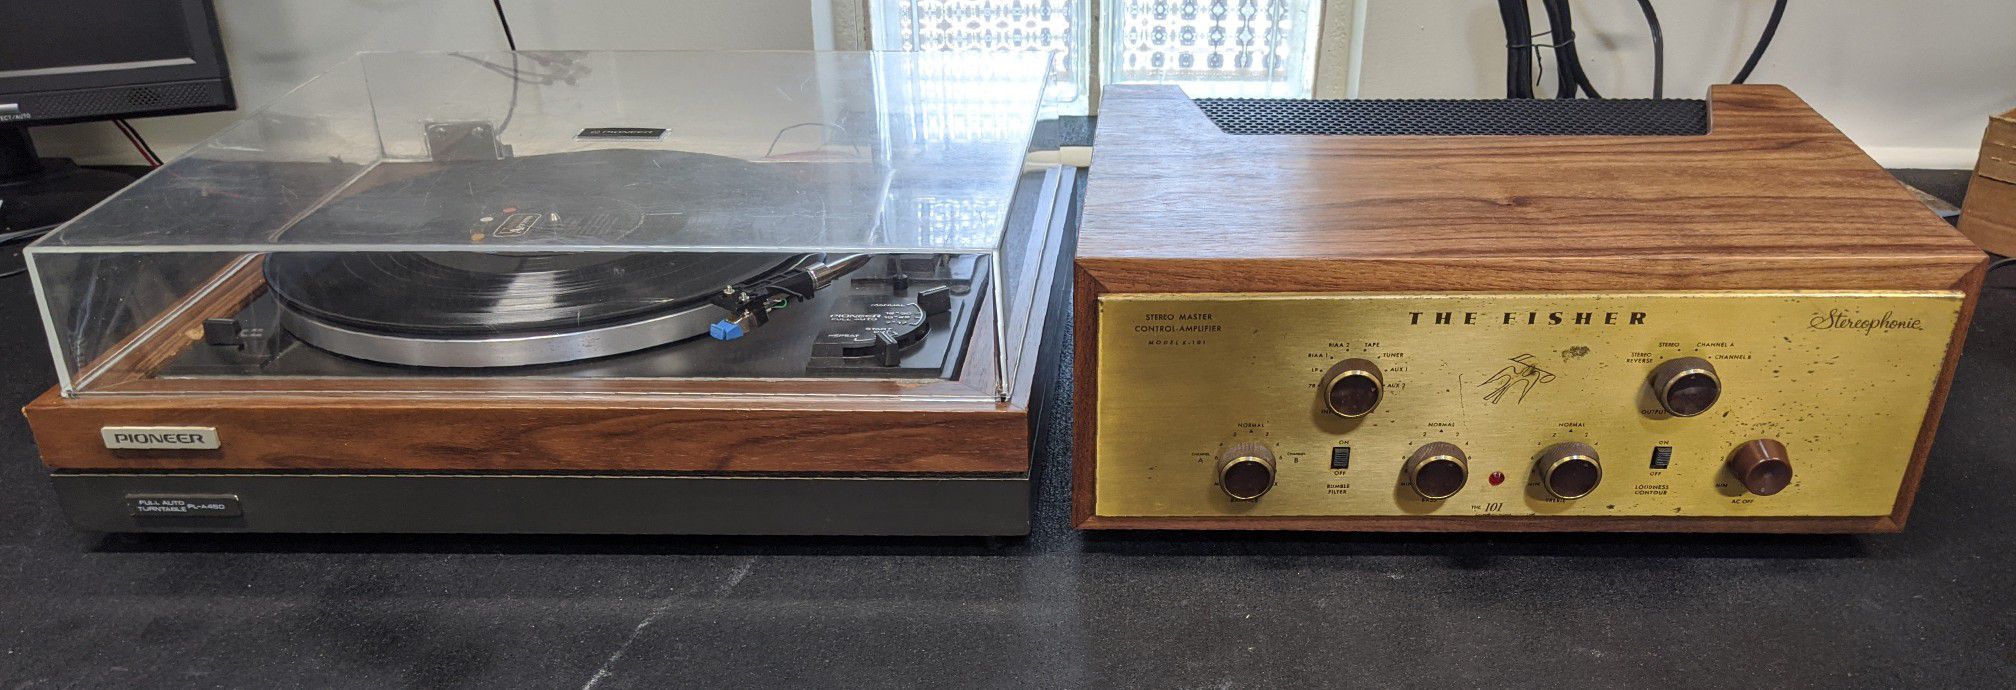 Vintage Fisher Tube Stereo and Pioneer Turntable